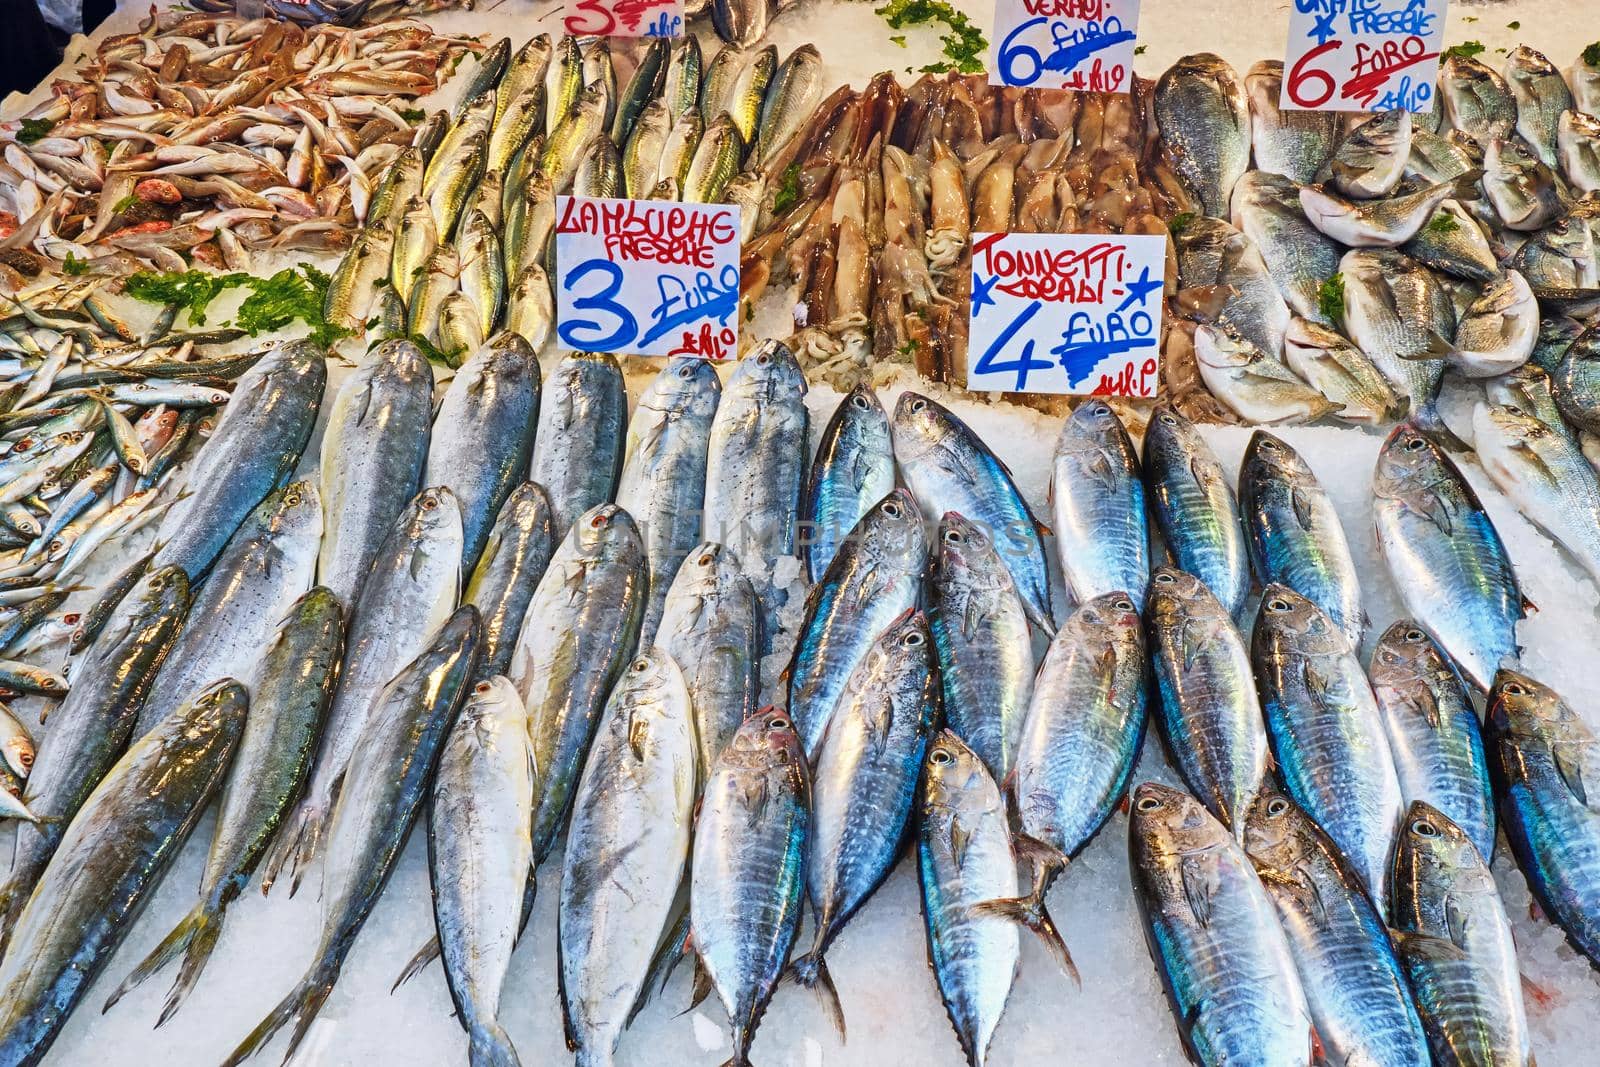 Tuna and other fish for sale at a market